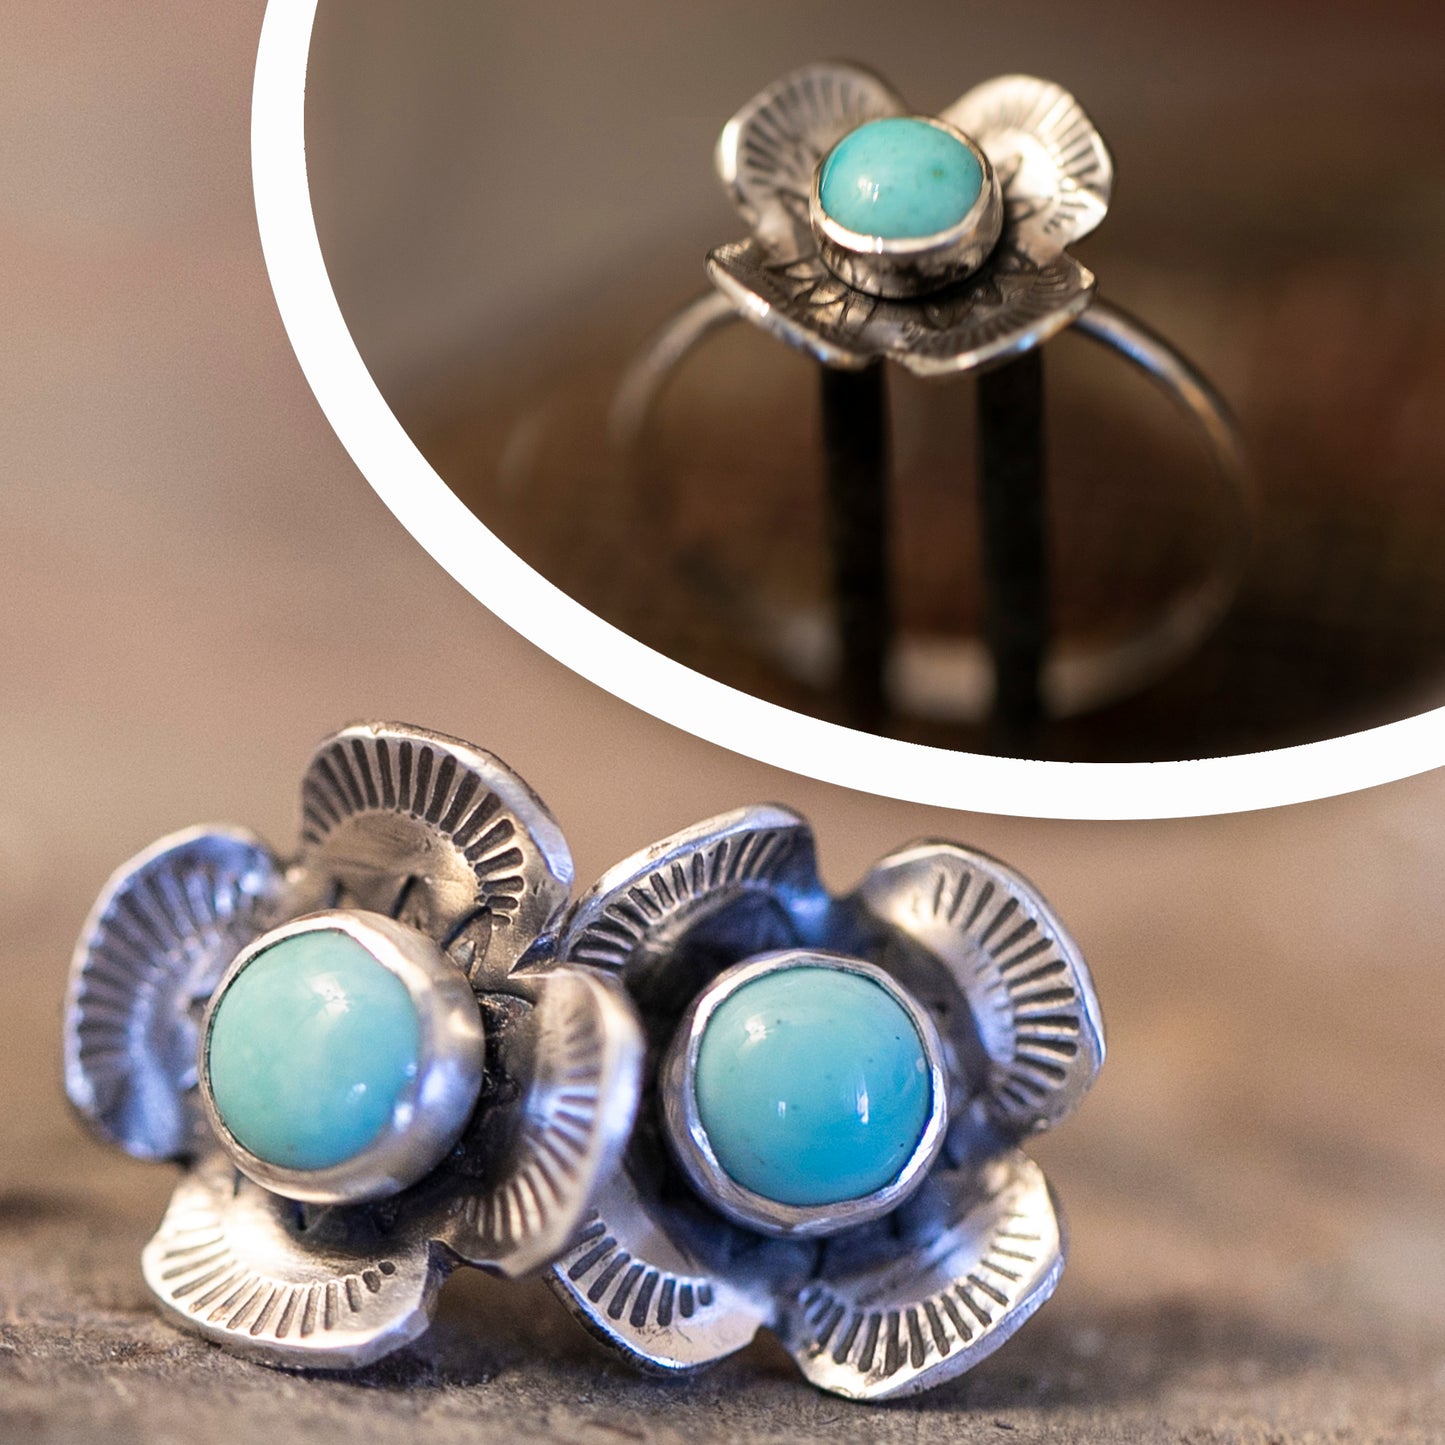 Turquoise Buttercup Ring and Studs Sets